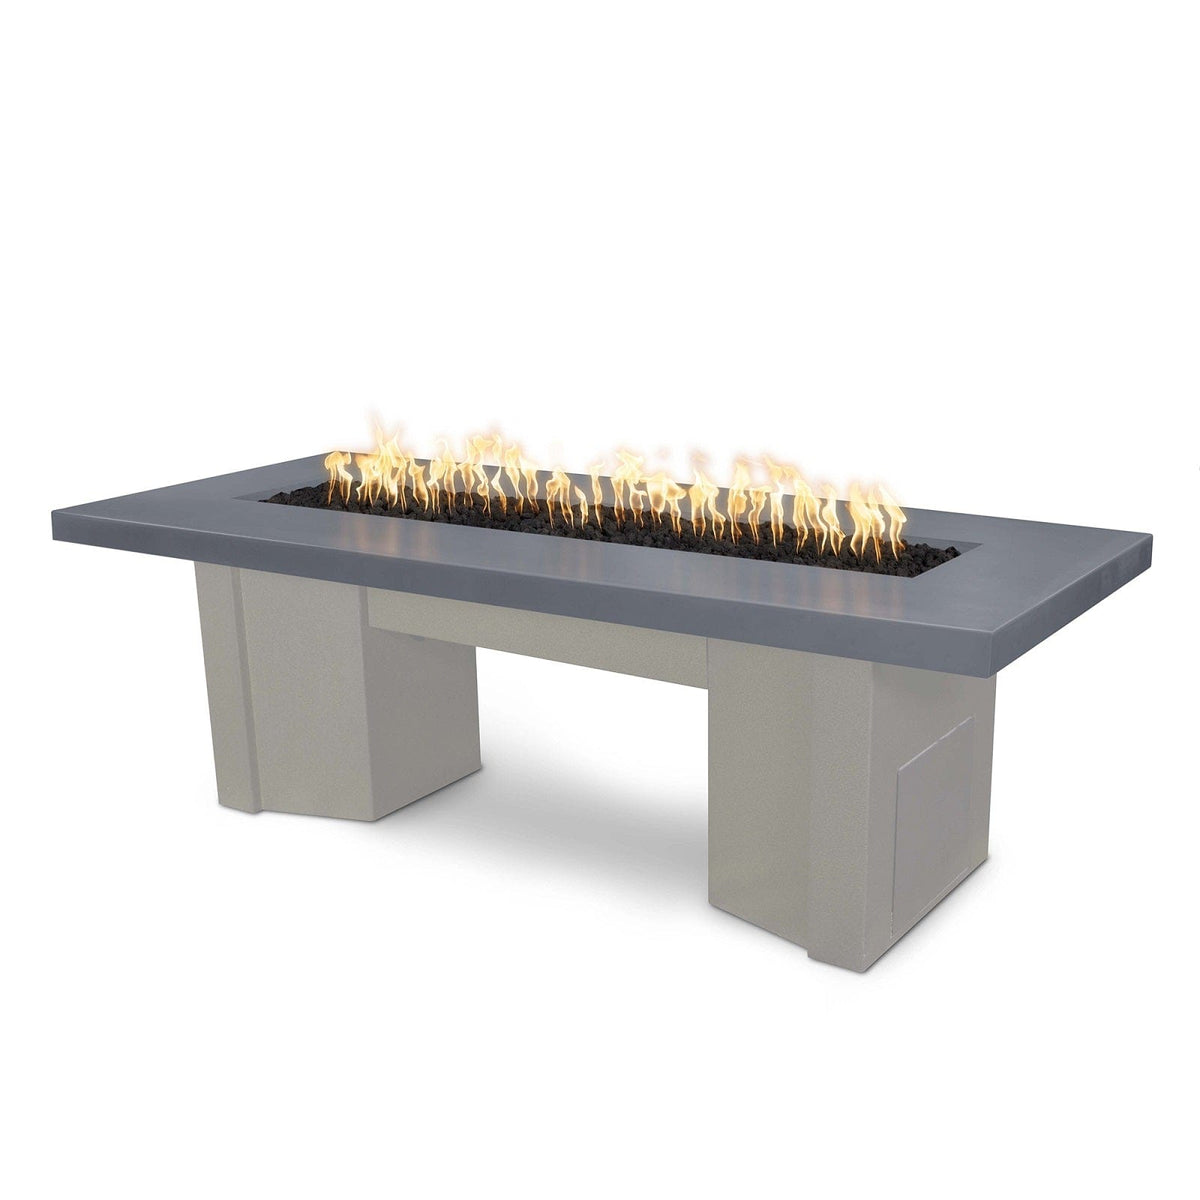 The Outdoor Plus Fire Features Gray (-GRY) / Pewter Powder Coated Steel (-PEW) The Outdoor Plus 78&quot; Alameda Fire Table Smooth Concrete in Natural Gas - Match Lit / OPT-ALMGFRC78-NG